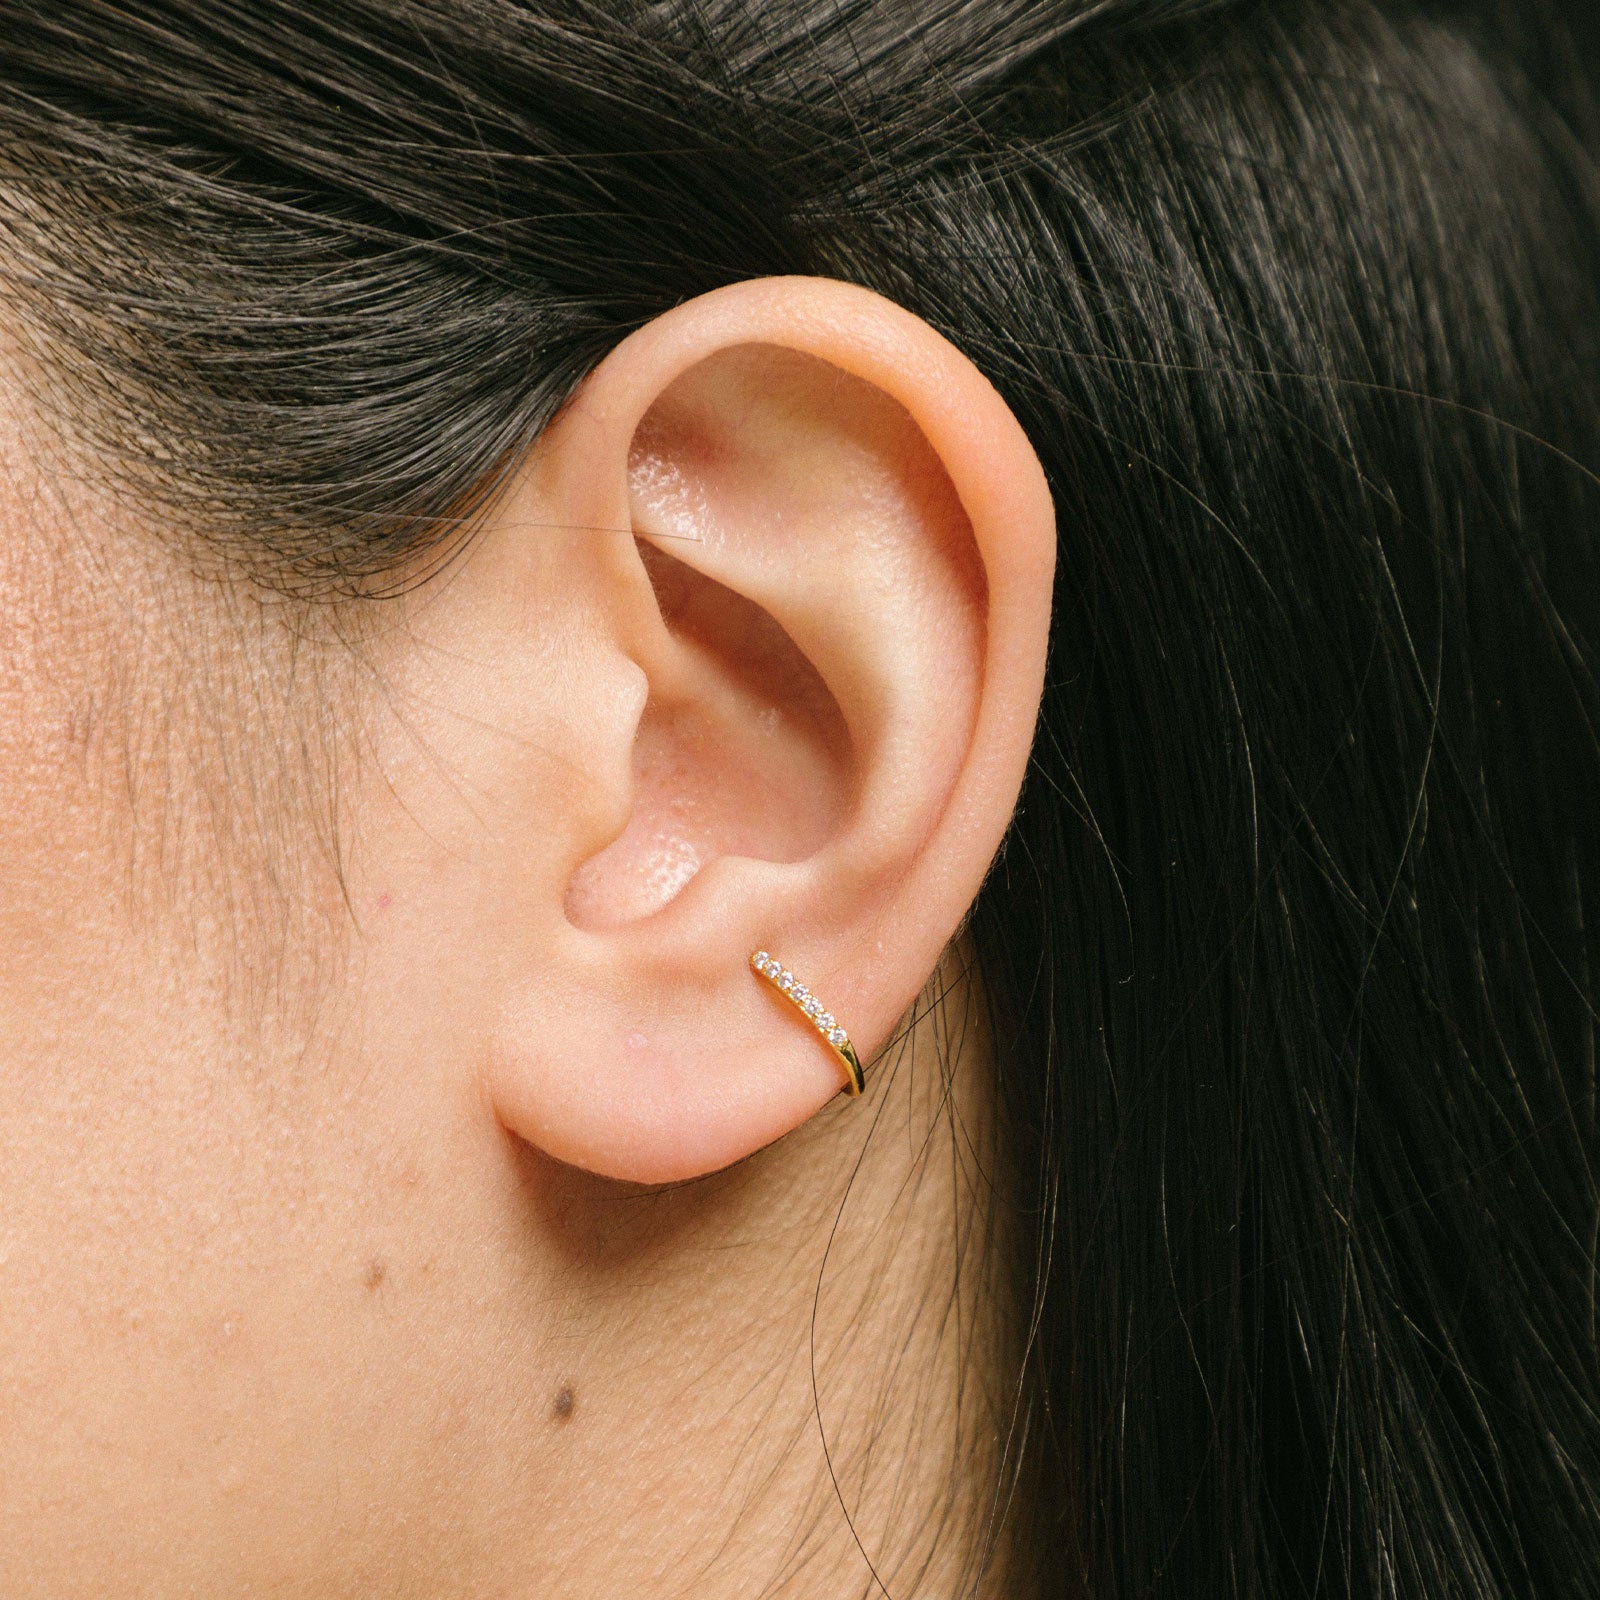 A model wearing the Thin Band Ear Cuff offers Medium Secure hold for up to 24 hours of comfortable wear. This ear cuff can be adjusted slightly once on the ear, and is ideal for all ear types, including thick/large ears, sensitive ears, small/thin ears, and stretched/healing ears. It is crafted from gold or silver plated copper alloy, with Cubic Zirconia for sparkle. This one-piece ear cuff also doubles as a faux nose piercing.